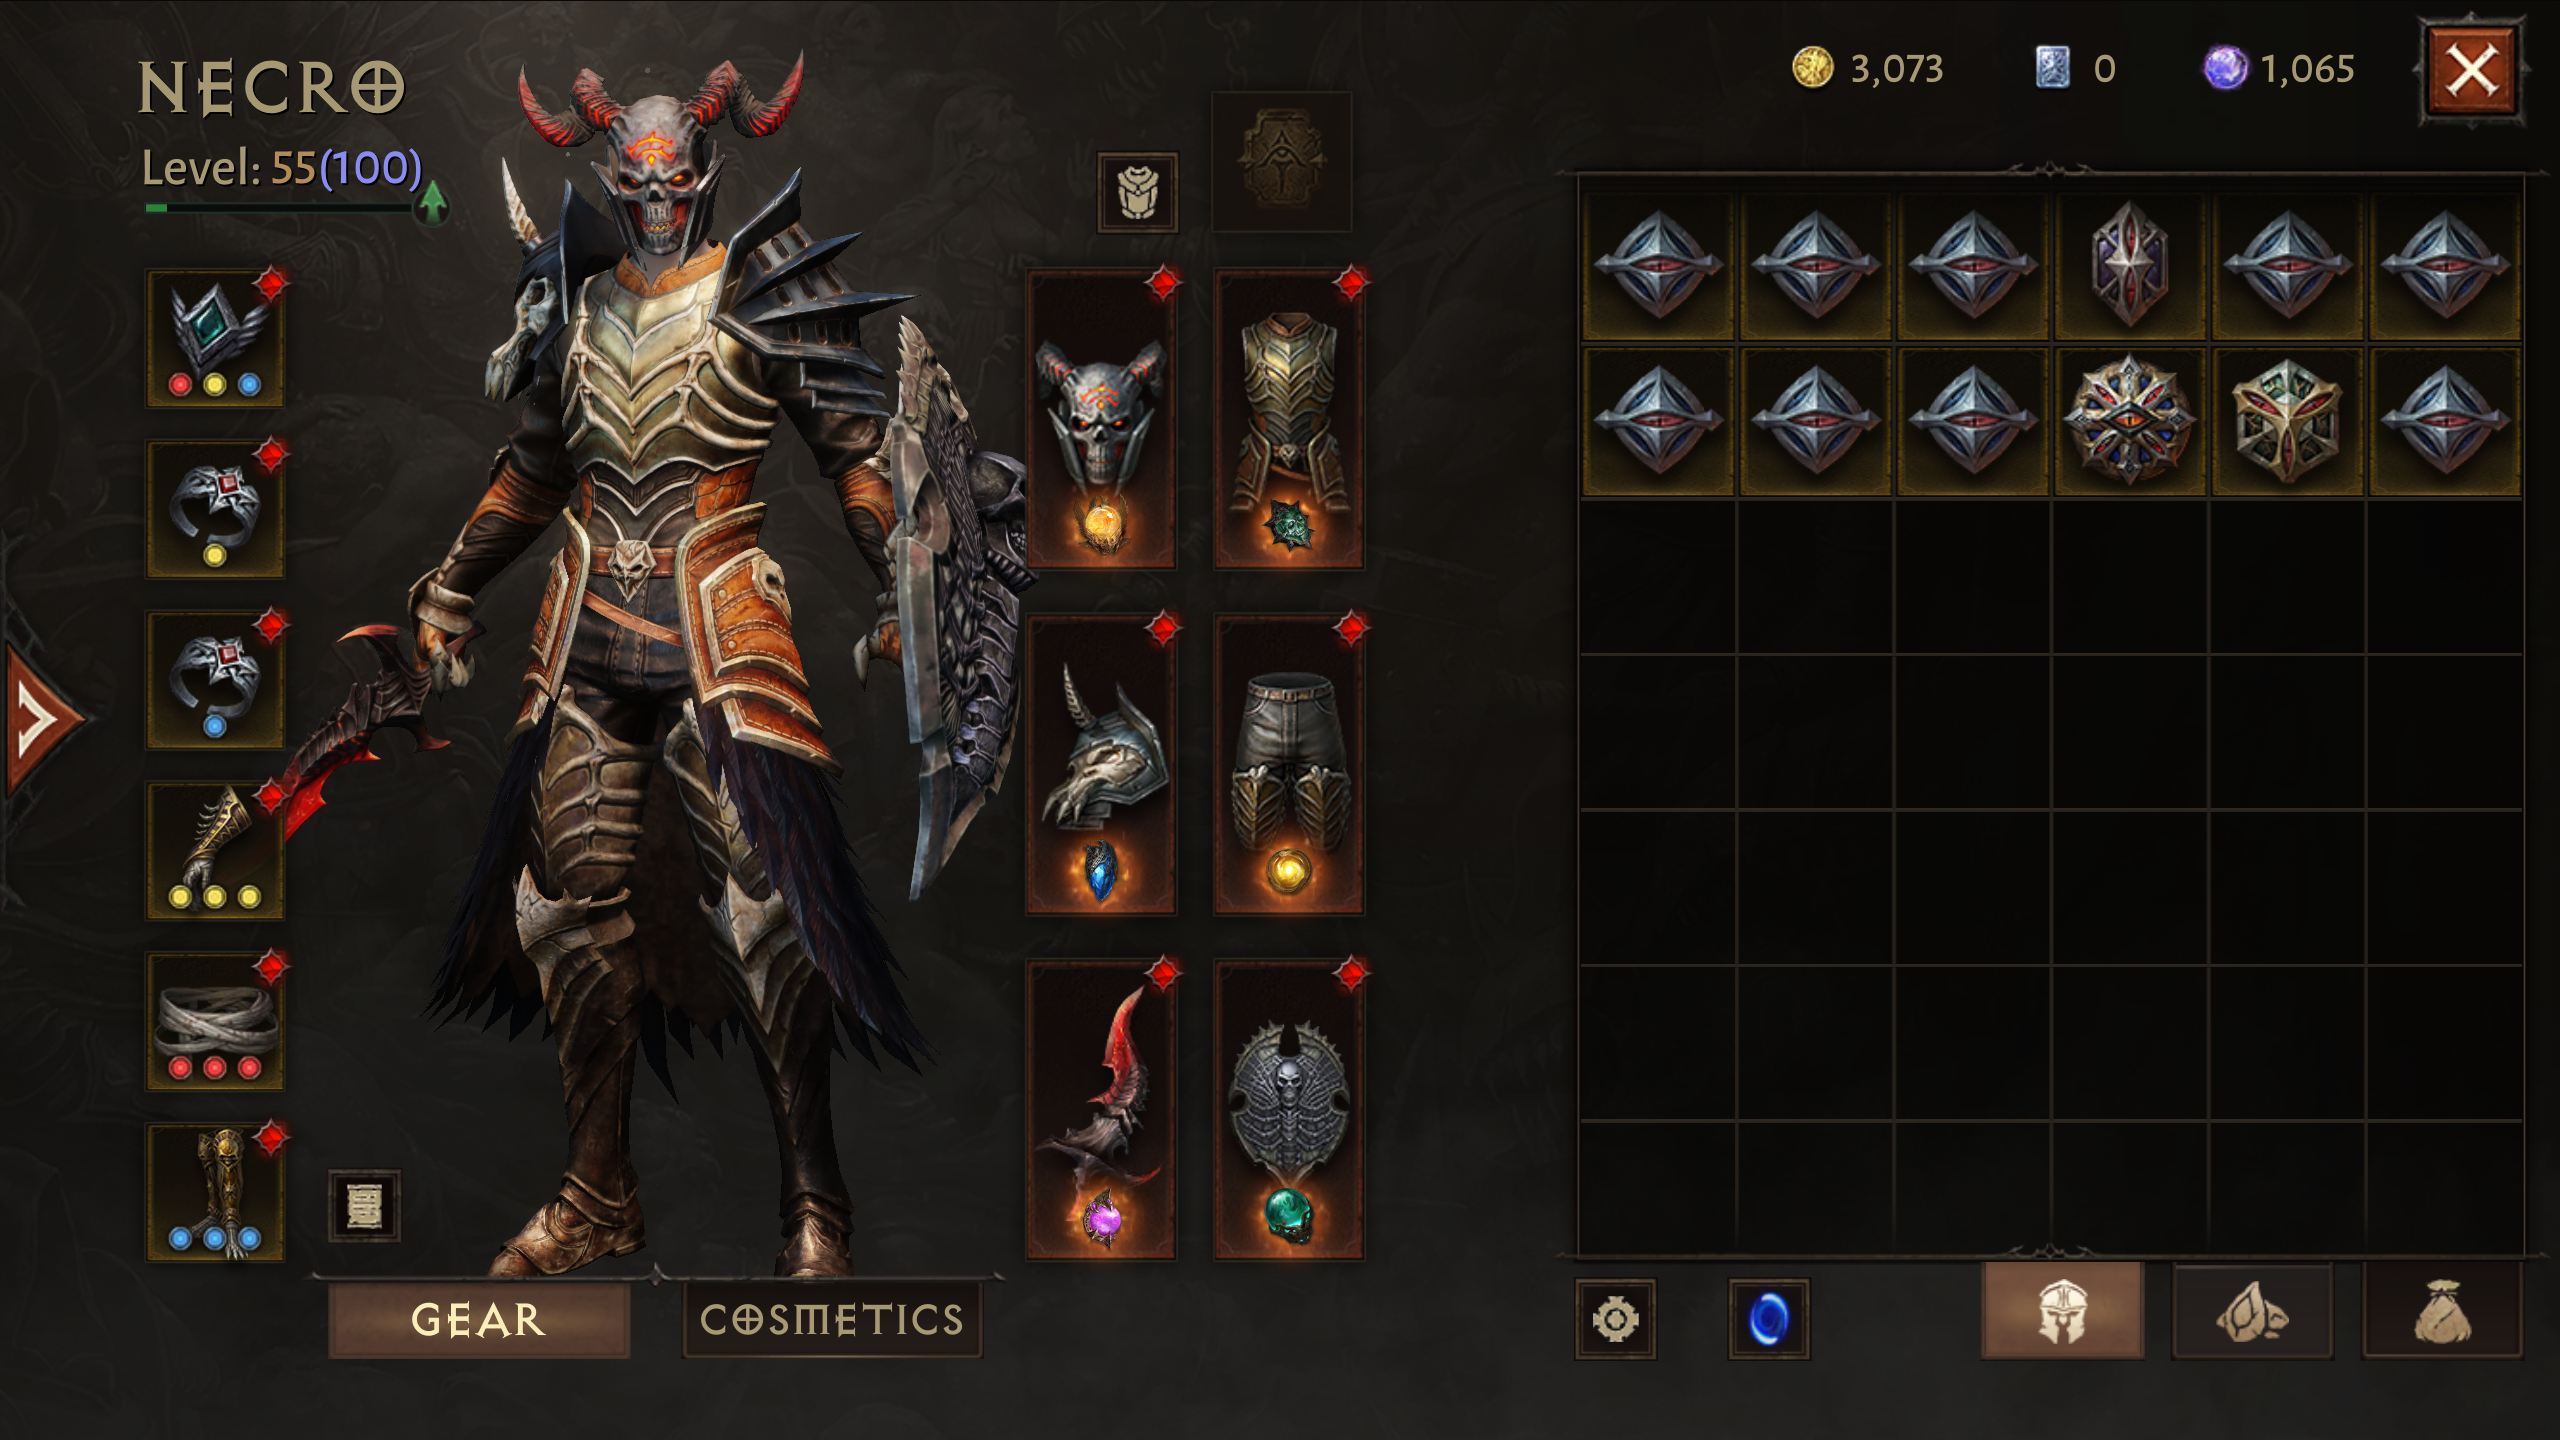 An inventory full of items utilising the power of Legendary Gems in Diablo Immortal